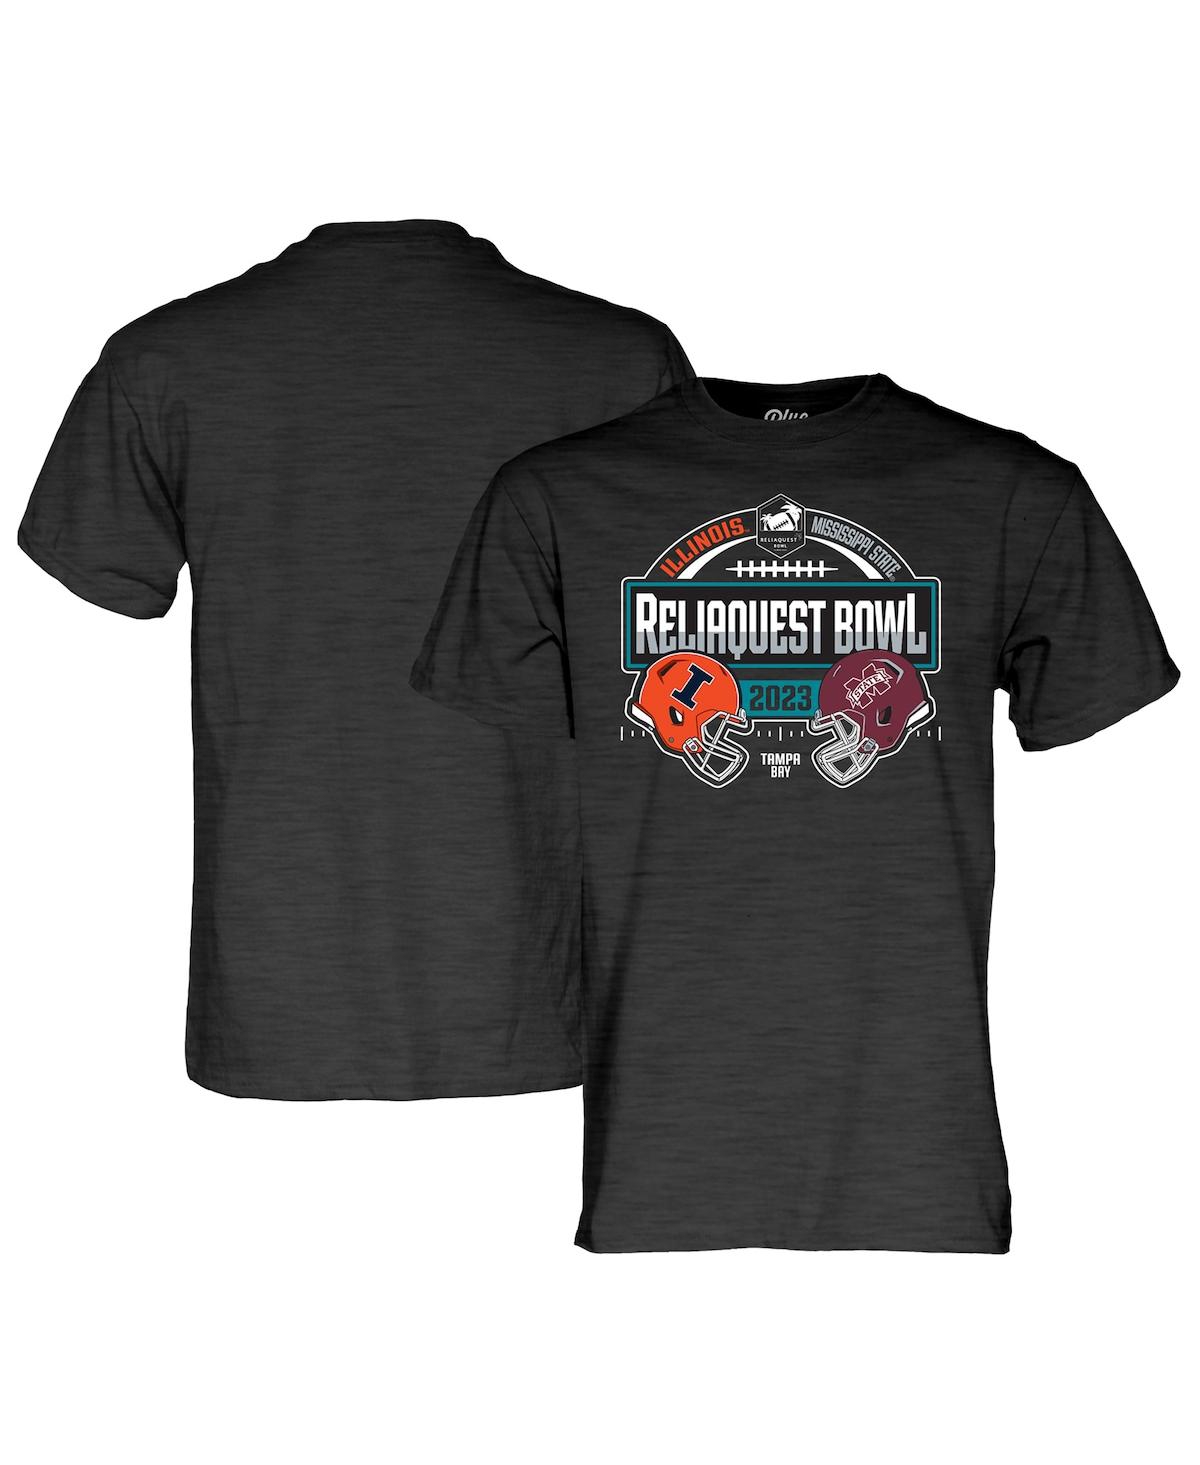 Men's Blue 84 Heather Charcoal Illinois Fighting Illini vs. Mississippi State Bulldogs 2023 ReliaQuest Bowl Matchup T-shirt - Heather Charcoal